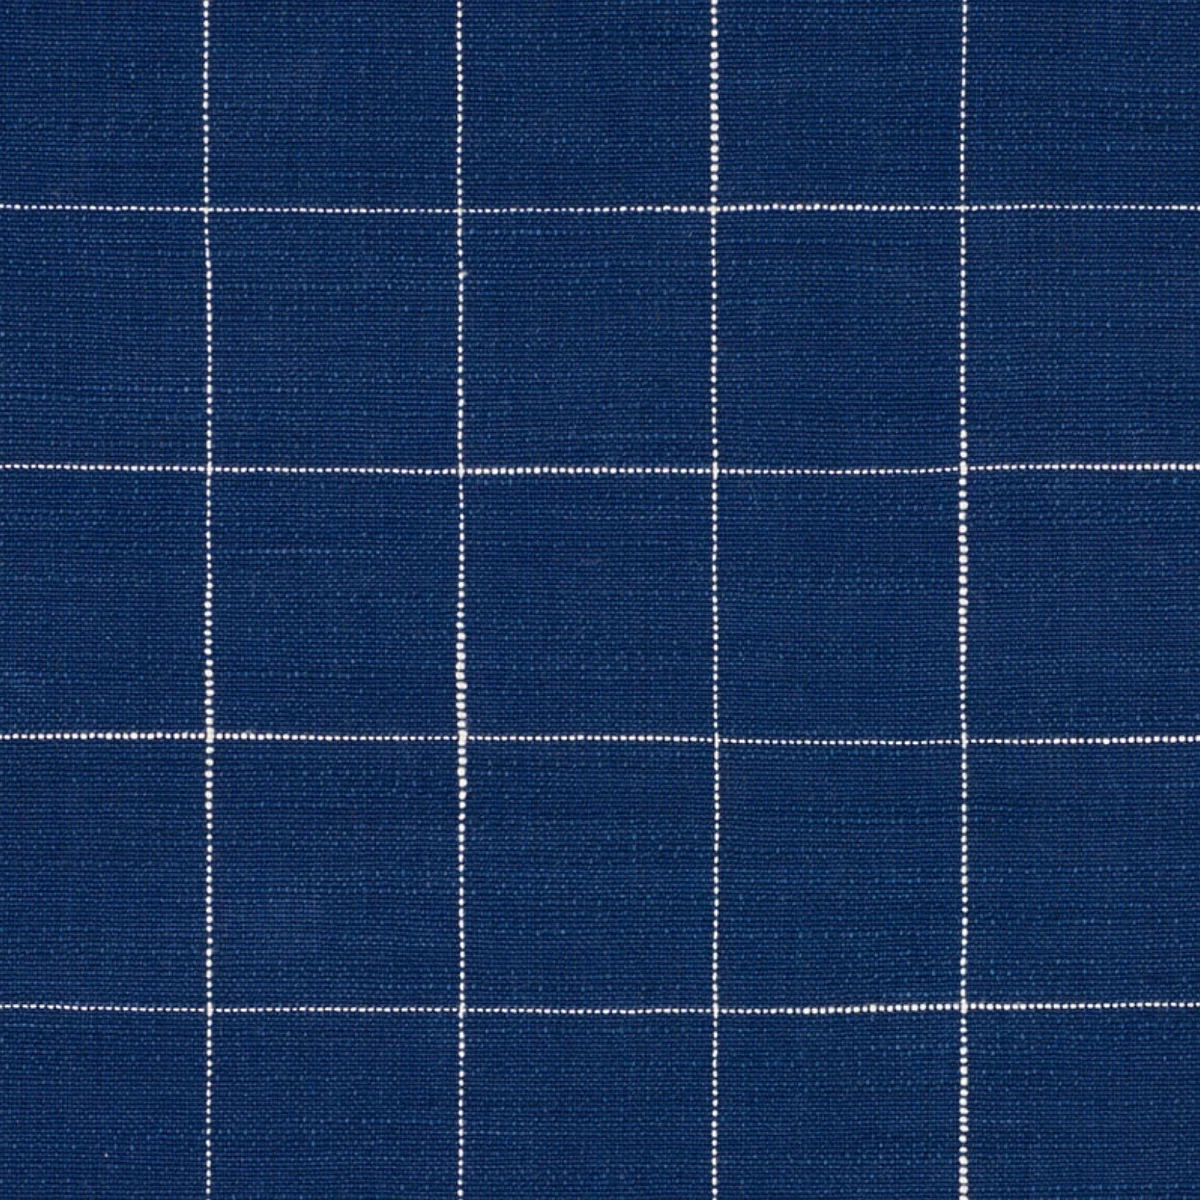 The image of an Marietta Fabric product